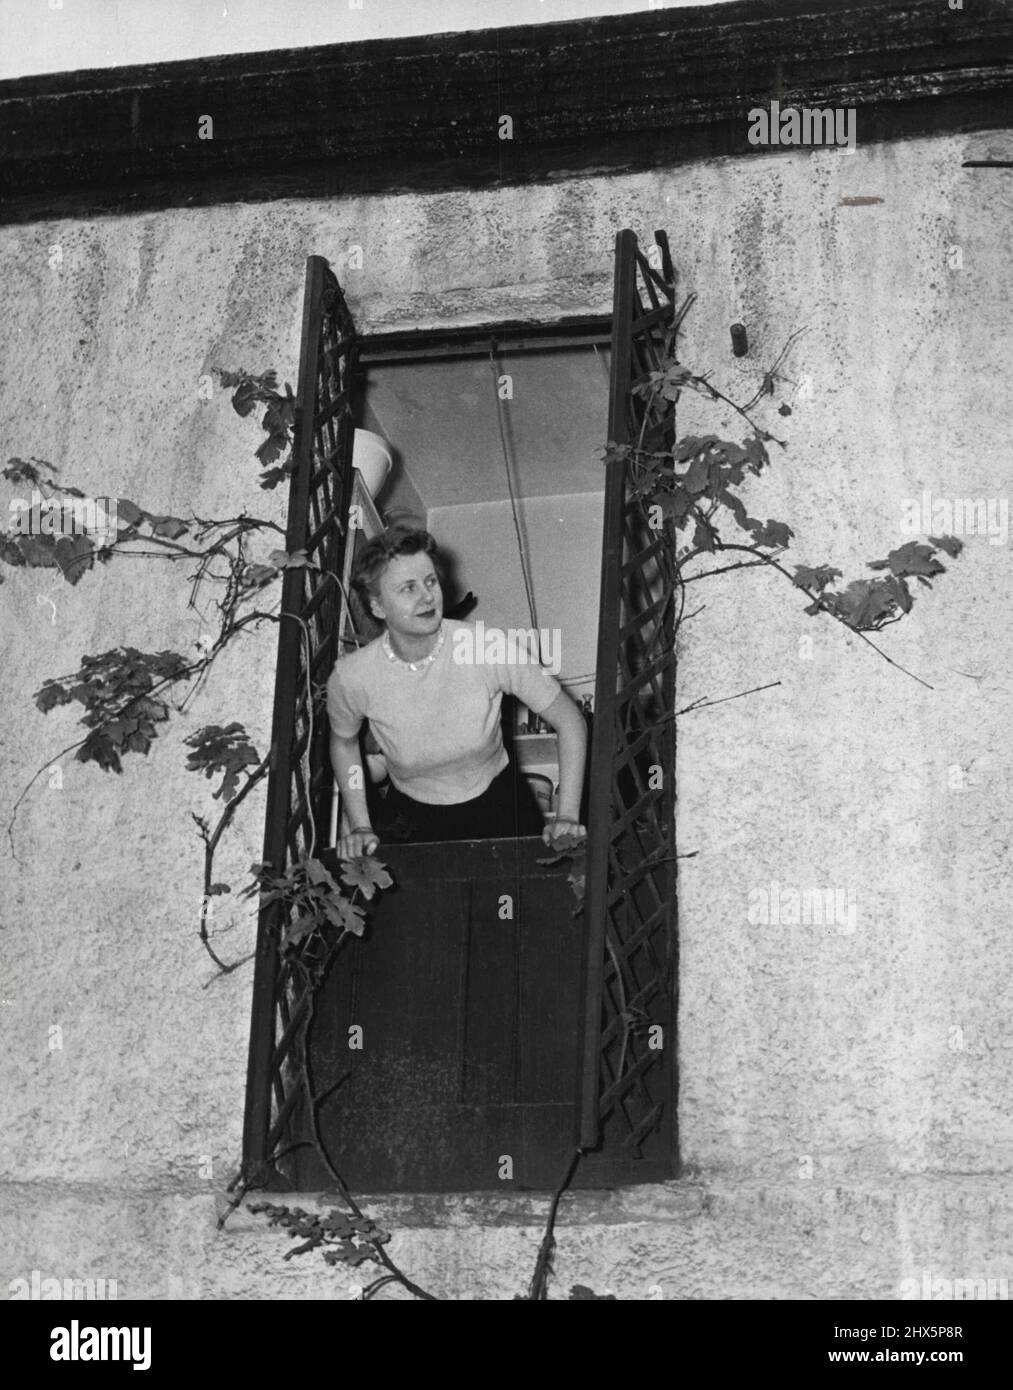 Dorothy Roberts takes a look at the weather - always a matter of conjecture in London - from the kitchen of her tiny flat at No. 9 Stanhope Mews. What's the outlook? For Dorothy, roses all the way. December 16, 1955. (Photo by A.G.S.U.P Picture). Stock Photo